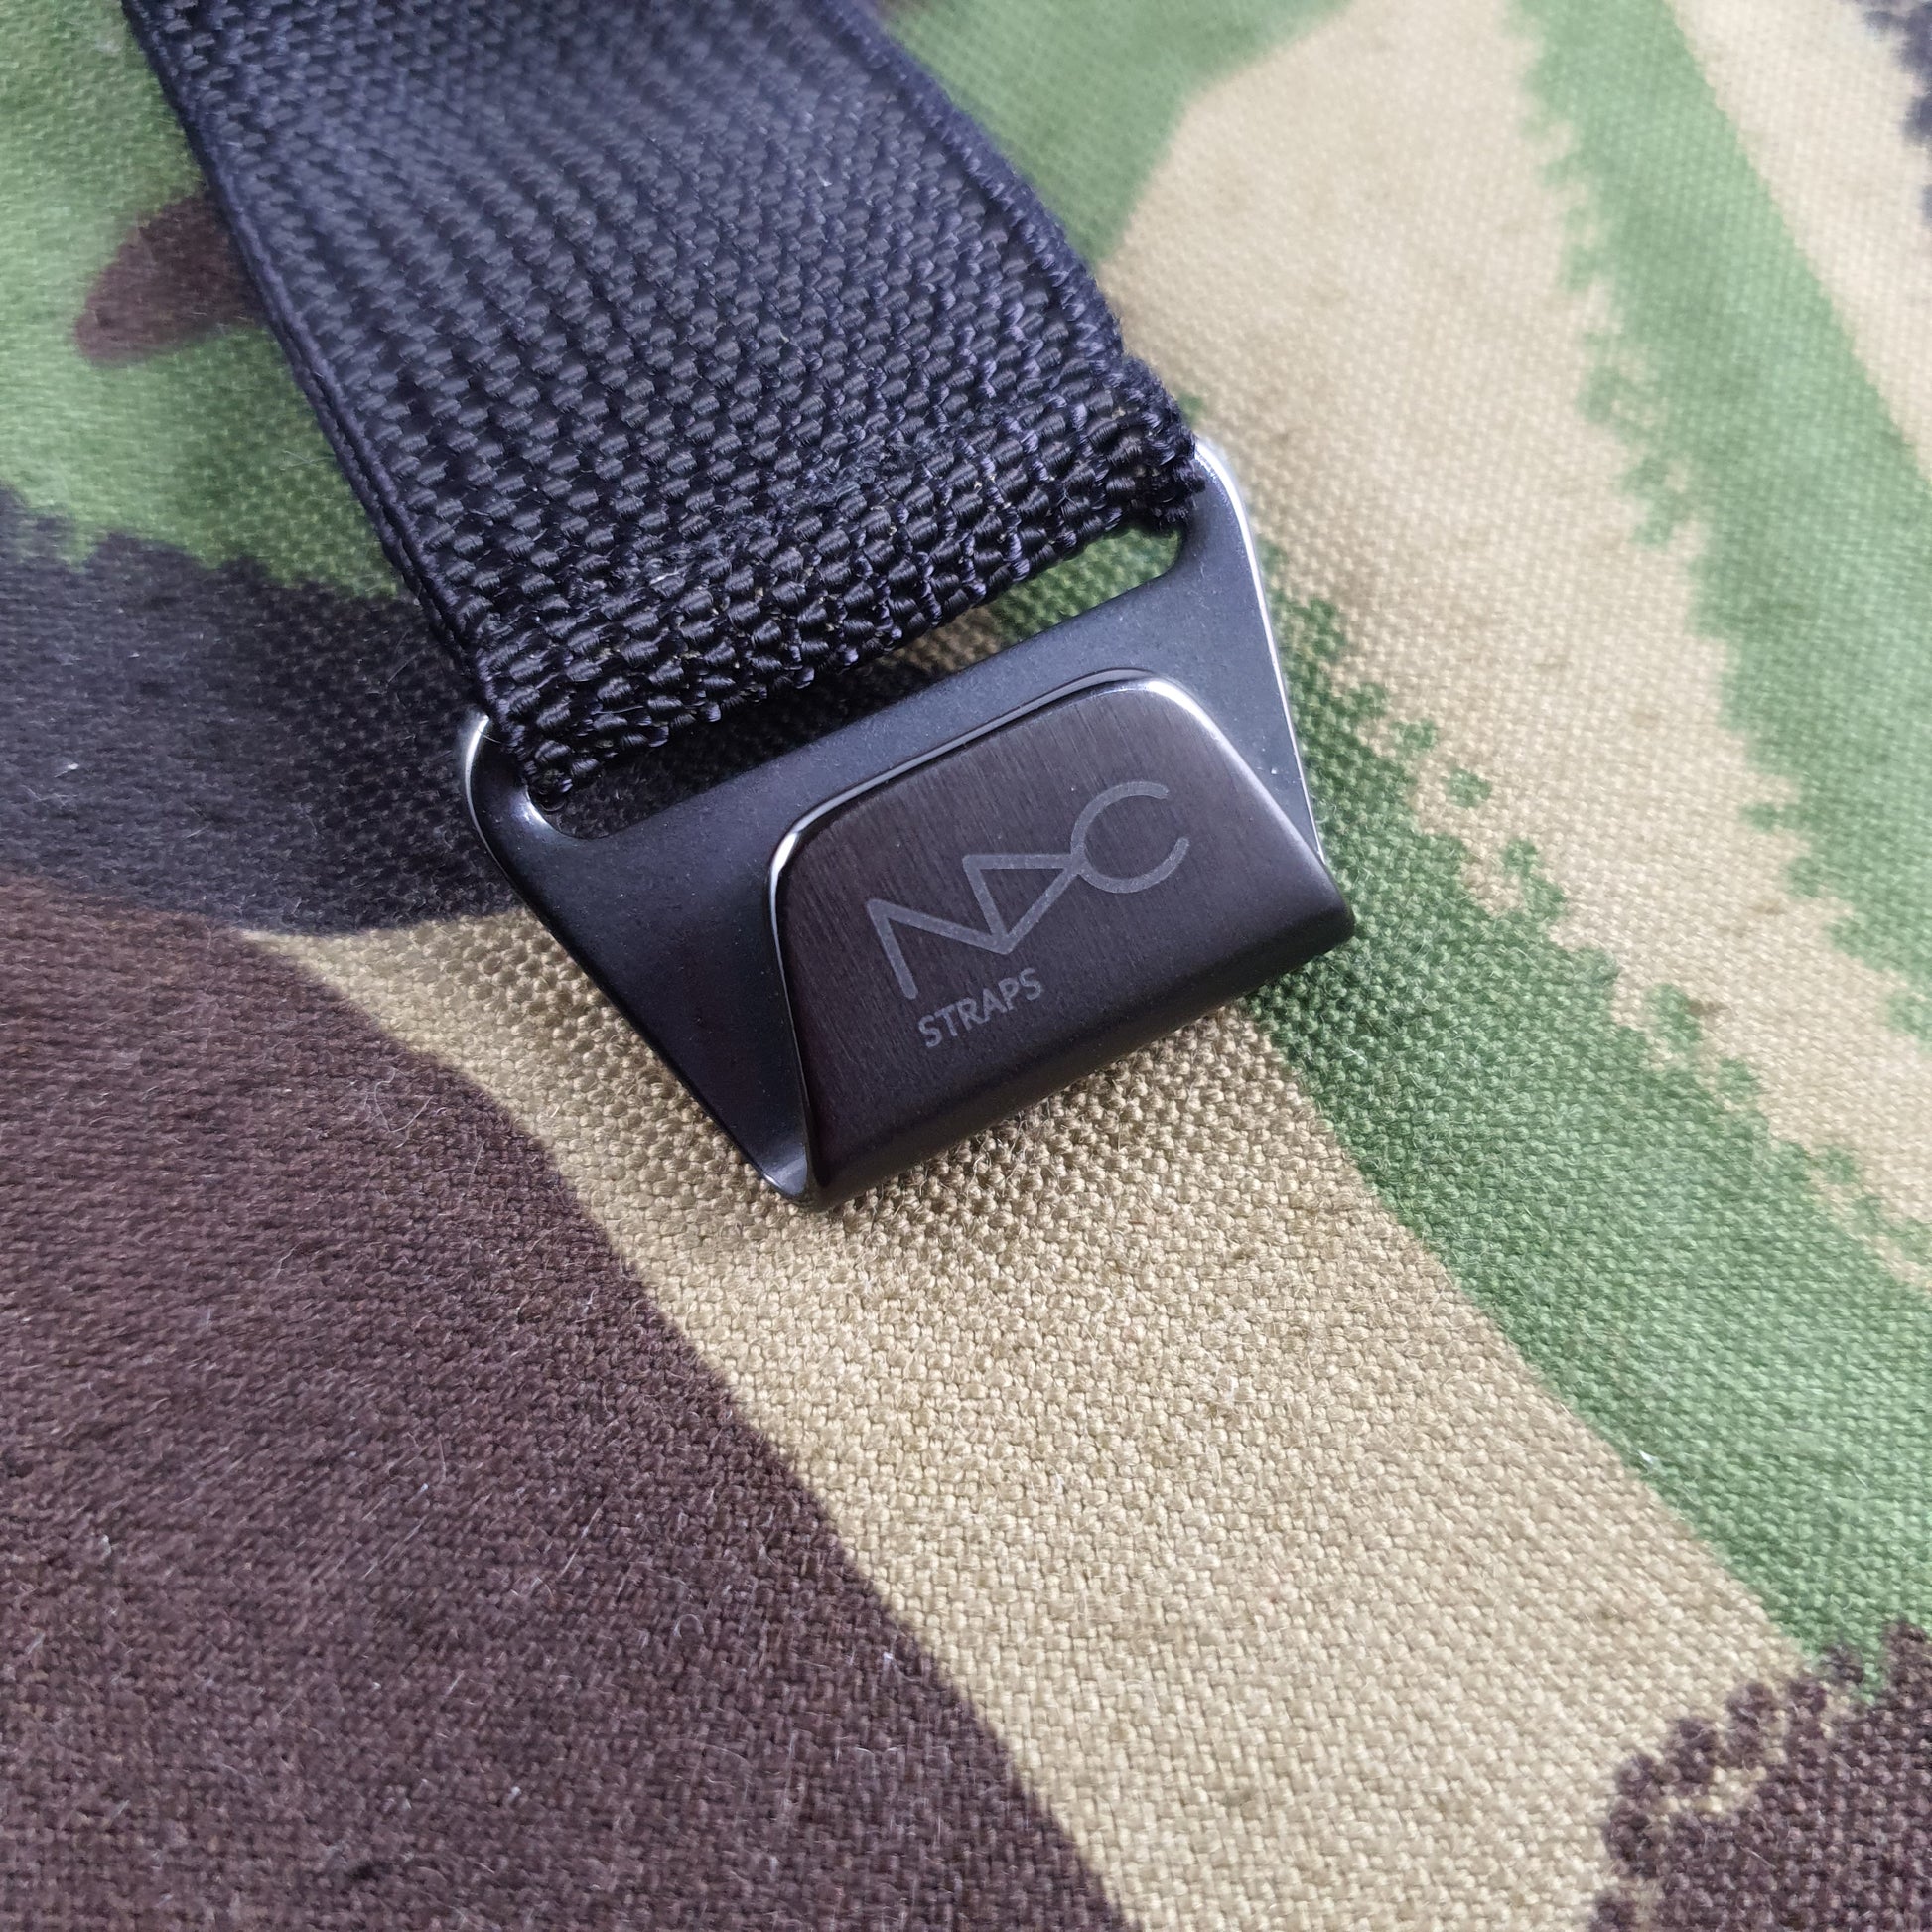 NDC Stealth Black - with Union Jack flag - NDC Straps